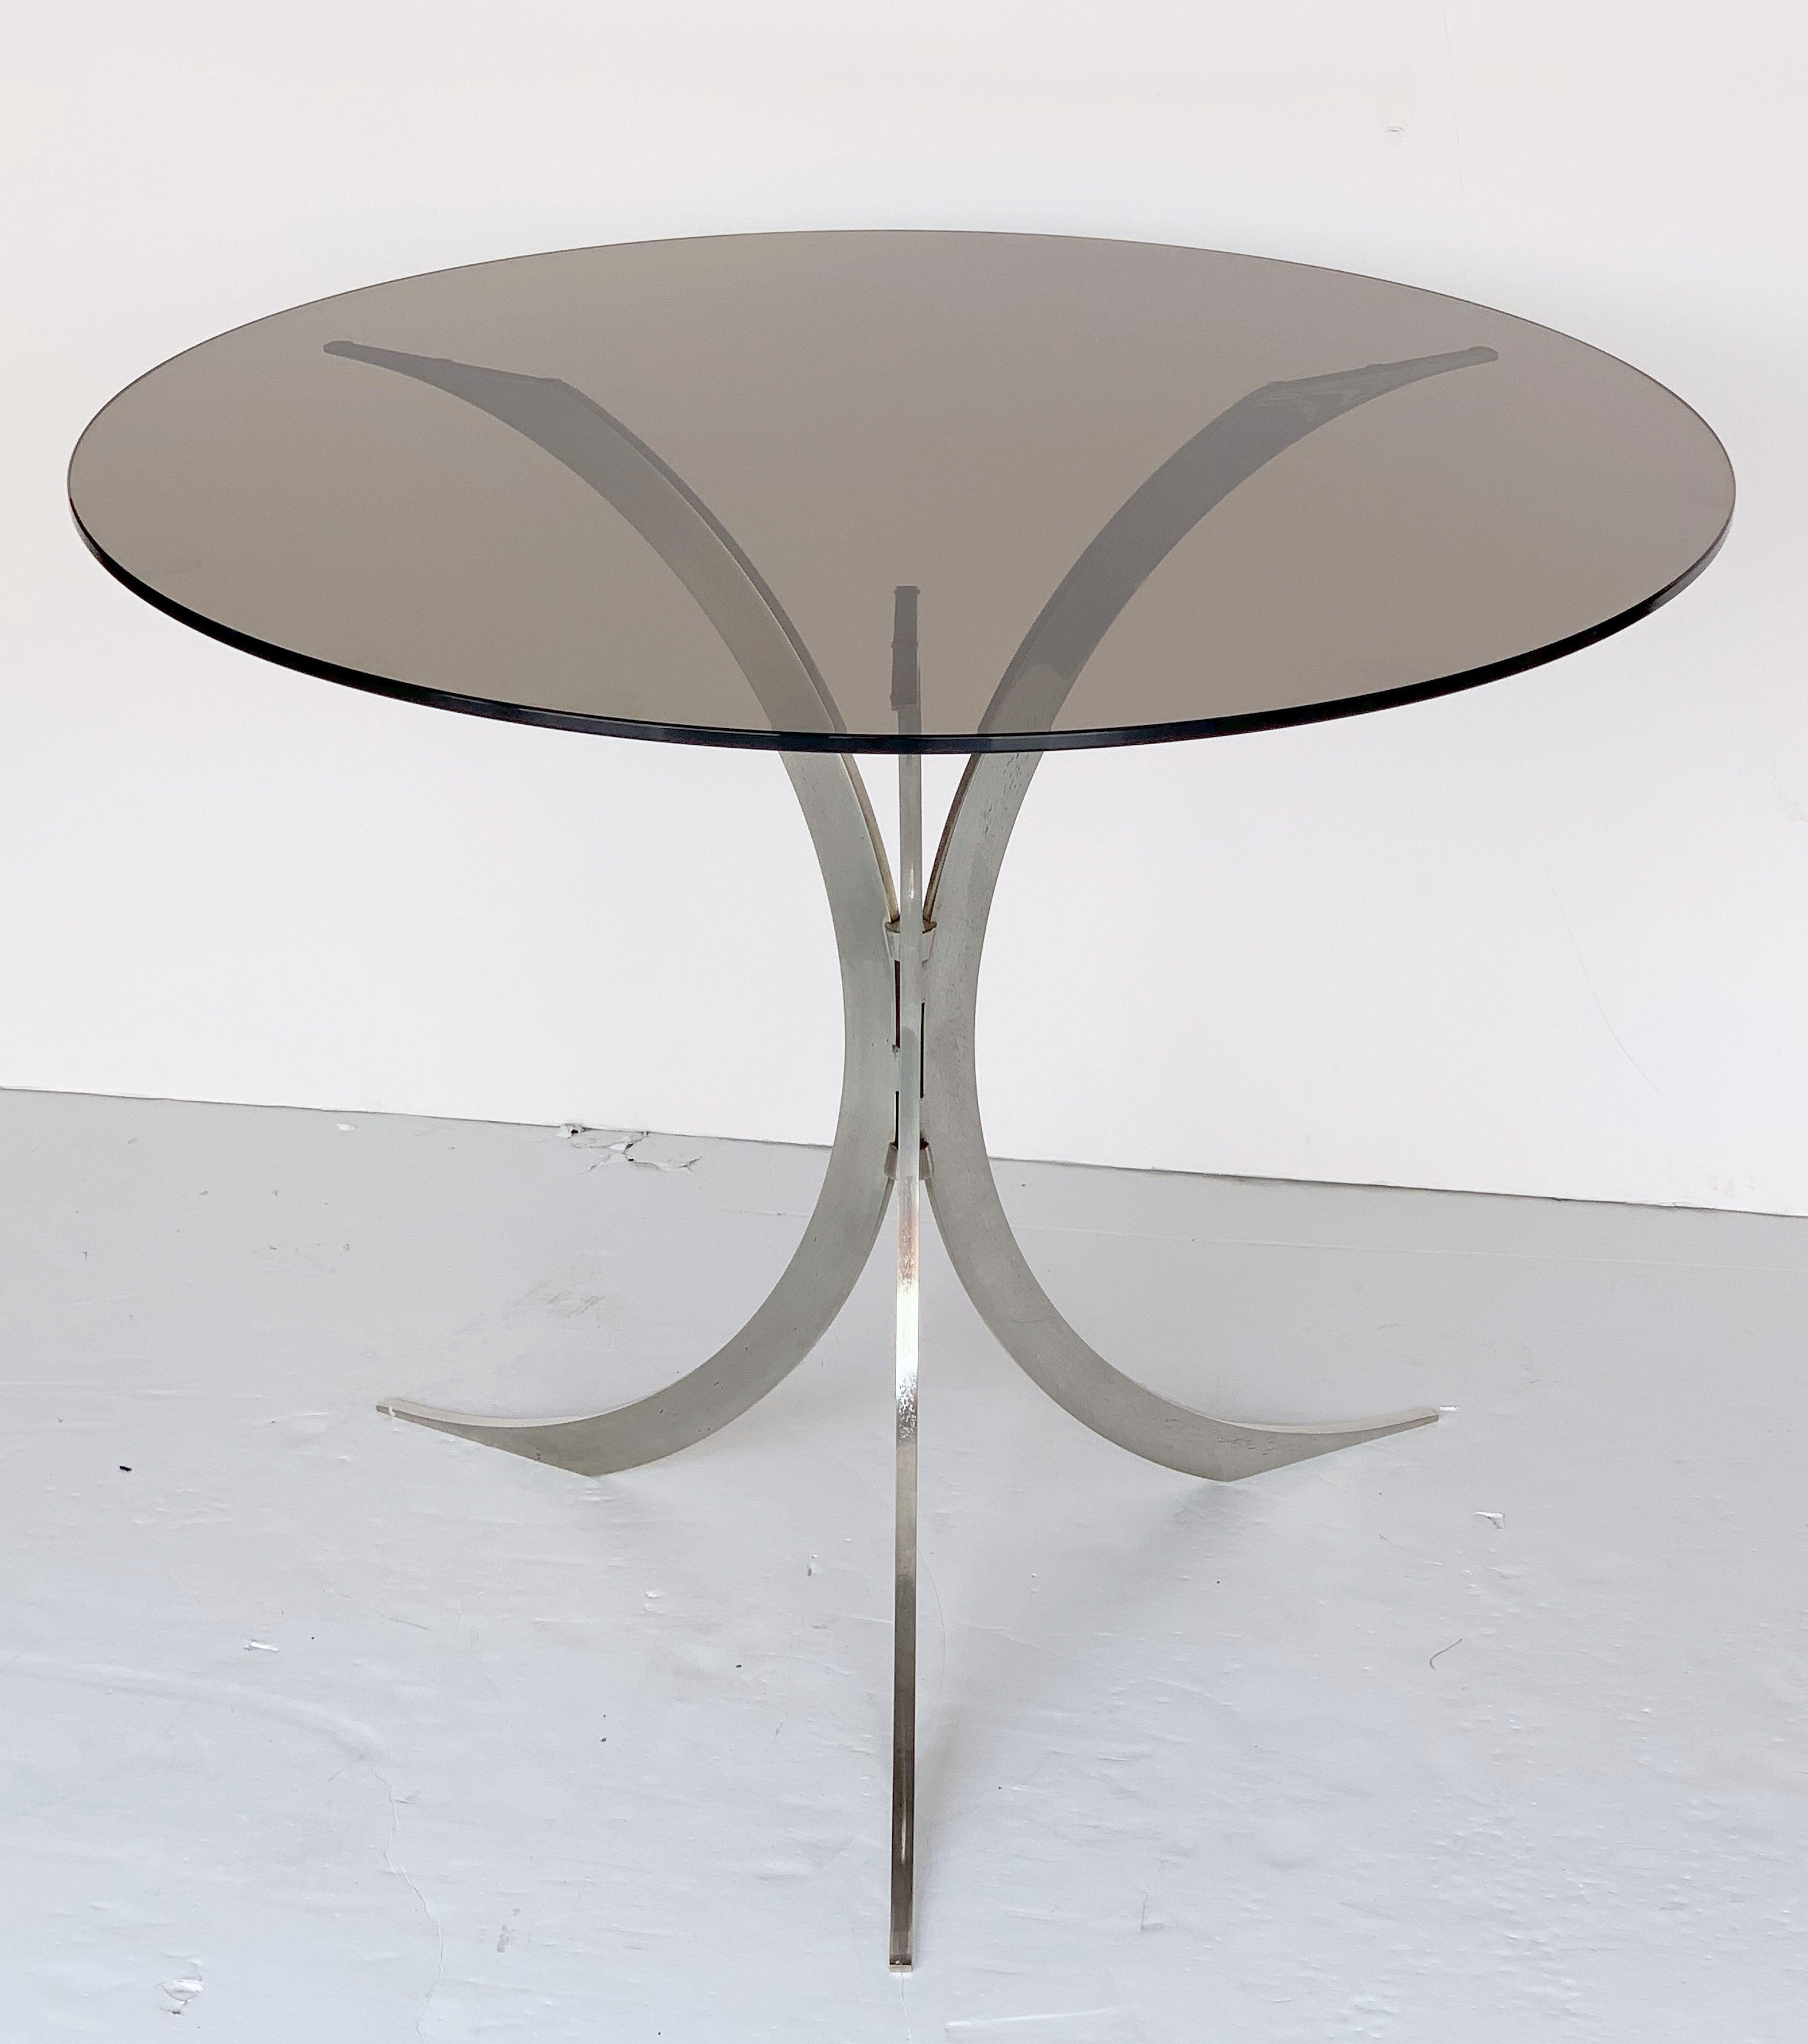 A stylish English round occasional table featuring a circular smoked glass top set upon a modern tripod base of chromed metal.

Measures: Height 28 1/4 inches x diameter 35 1/2 inches.